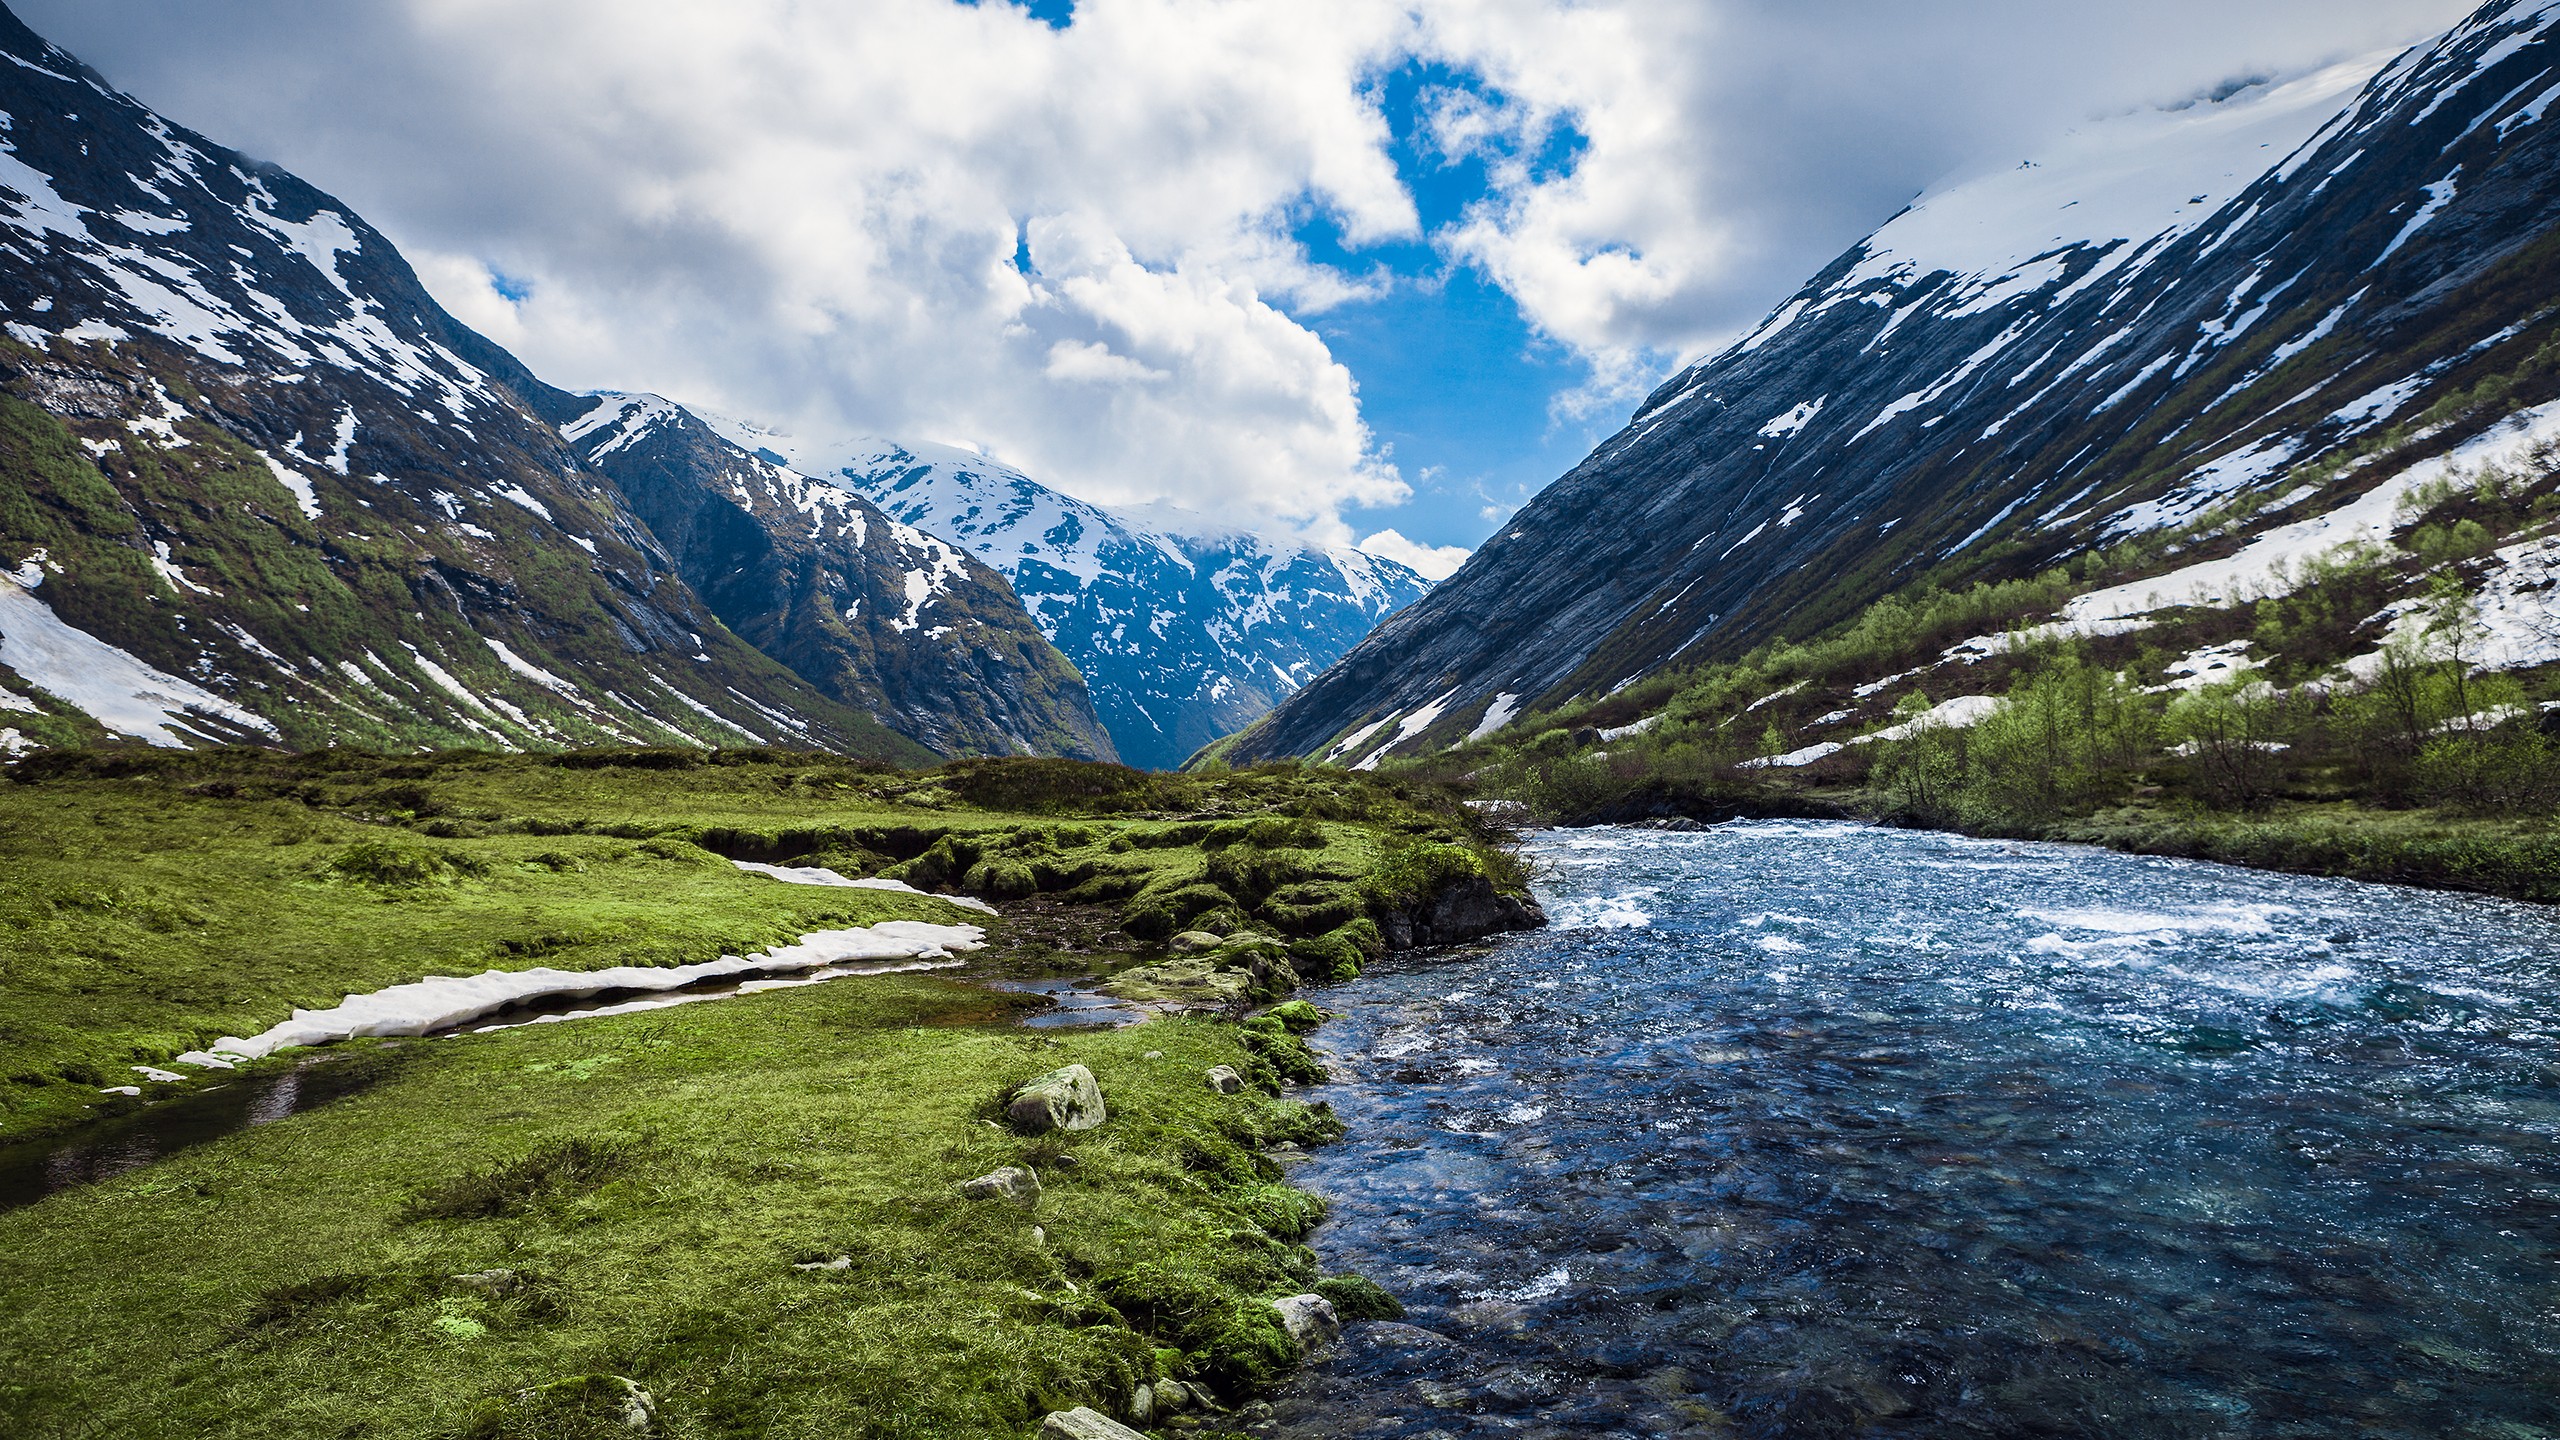 HD desktop wallpaper: Landscape, Nature, Mountain, Earth, Norway, Valley,  River download free picture #681384